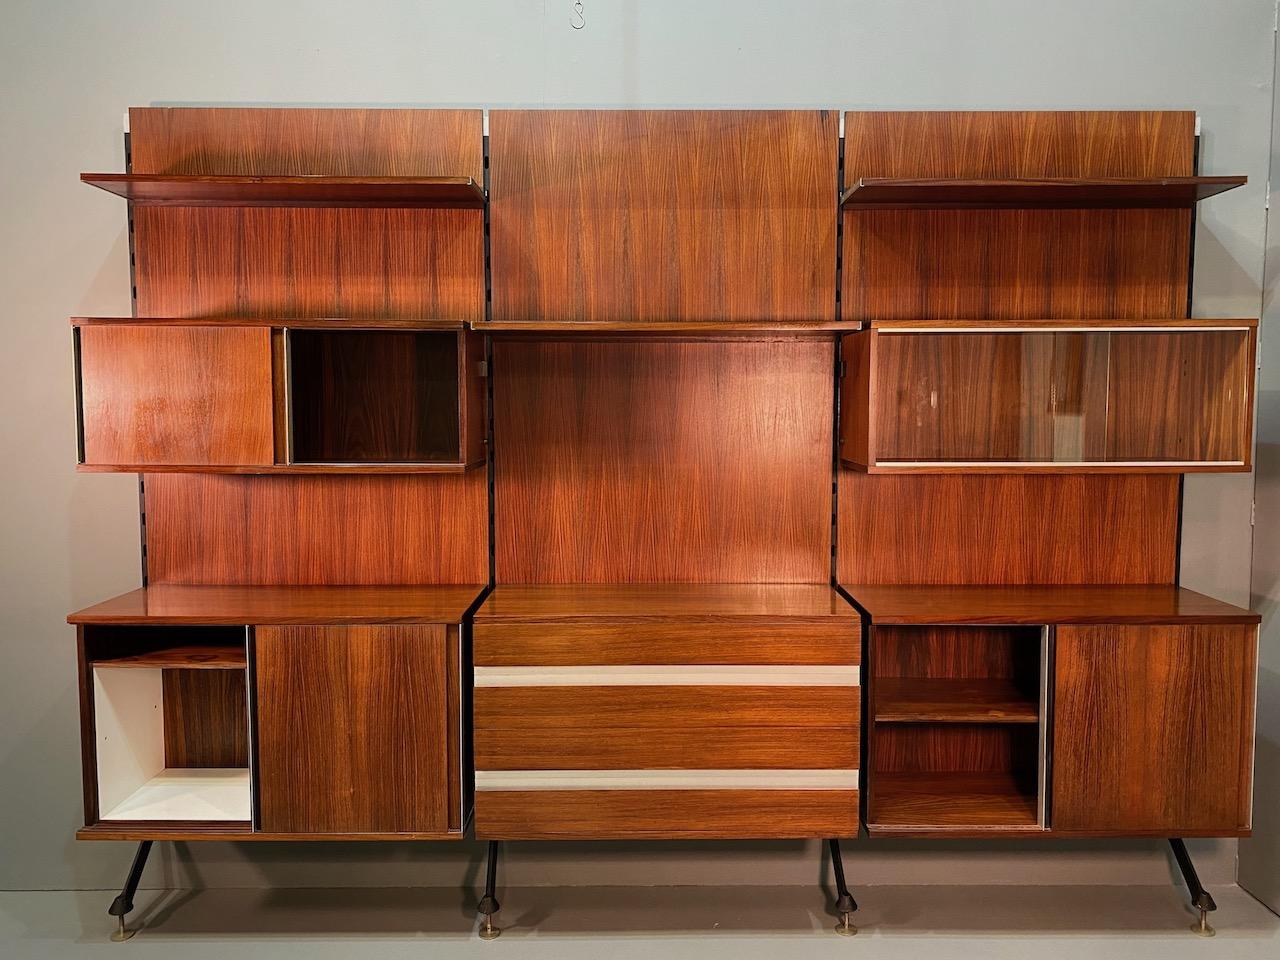 20th Century Urio Wall System by Ico Parisi for Mim Roma, Italy, 1957 For Sale